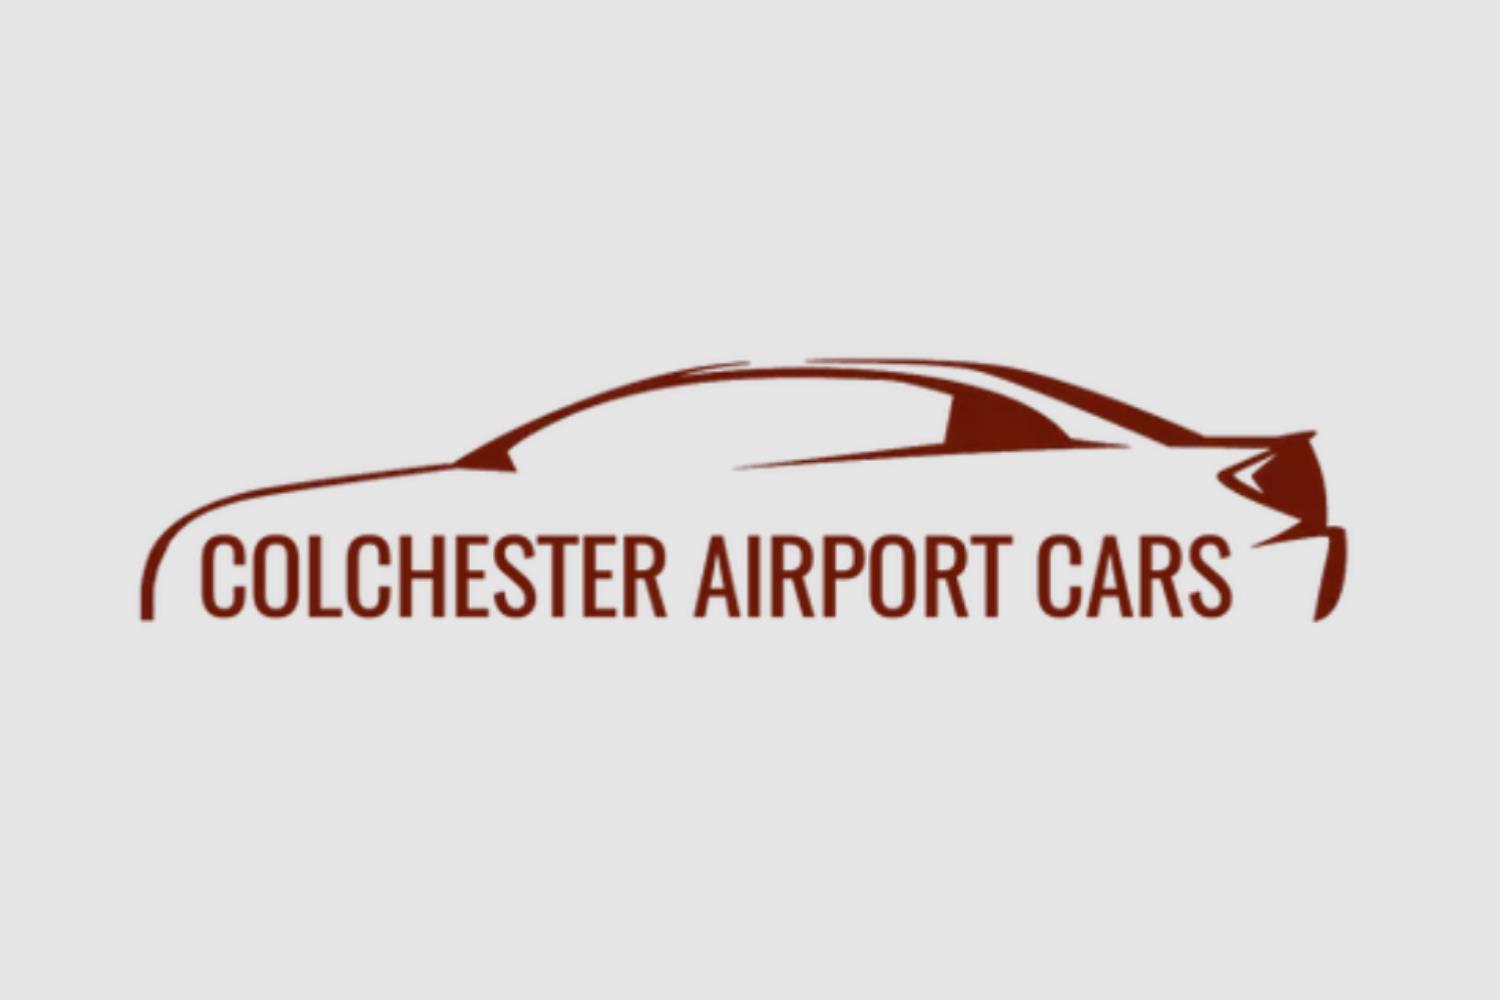 Colchester Airport Cars